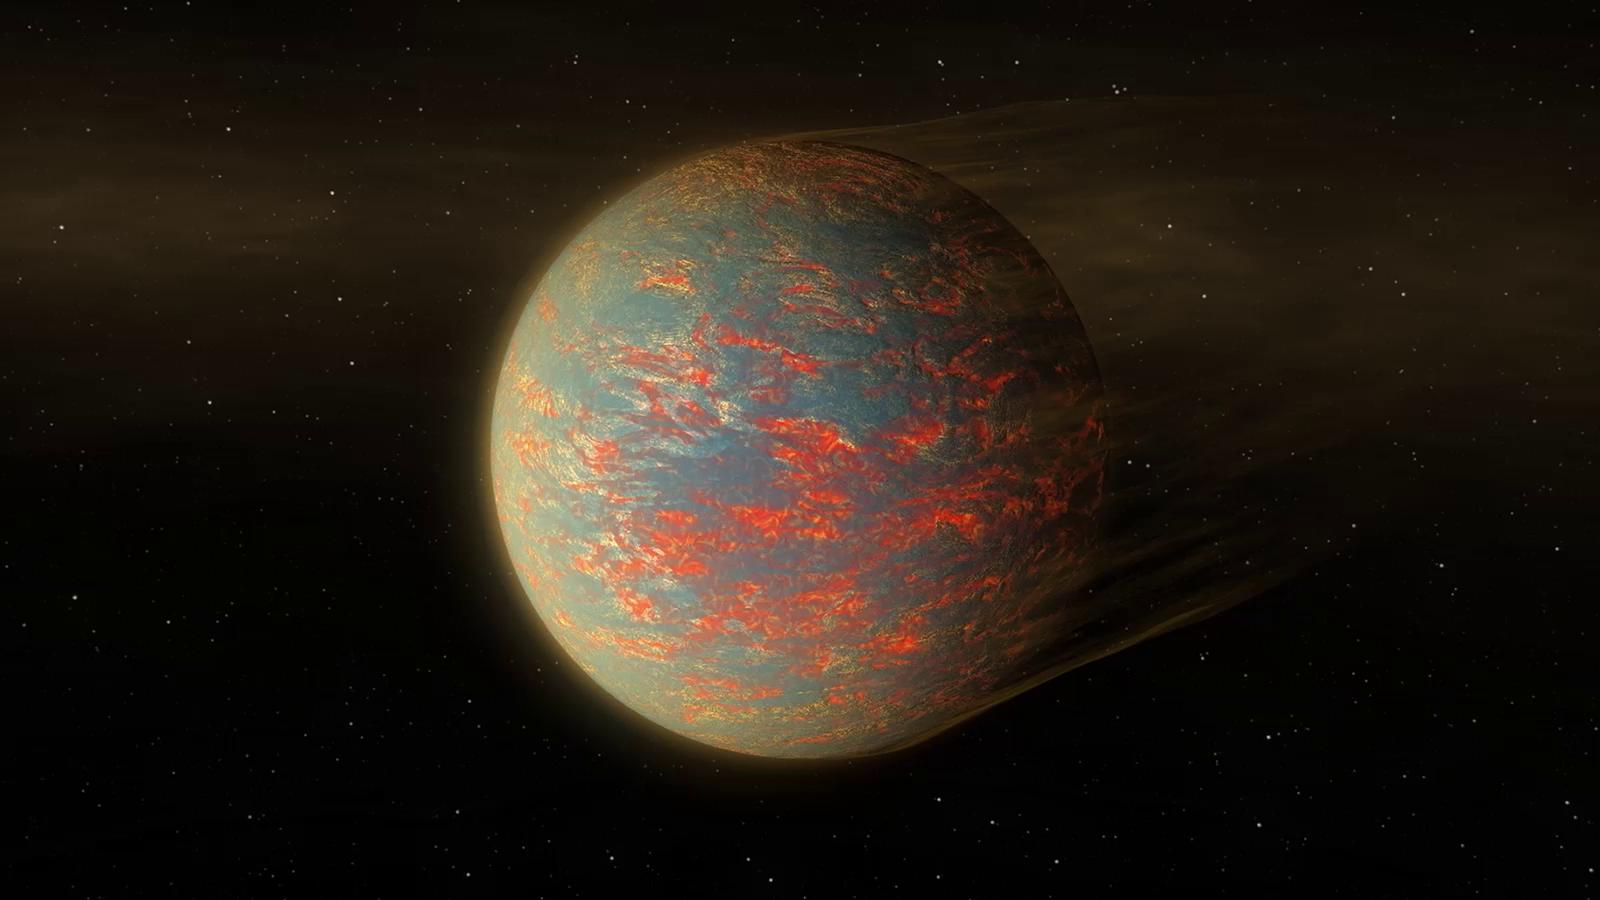 55 cancri e is seen in illustration as a fiery looking world with lava flows.